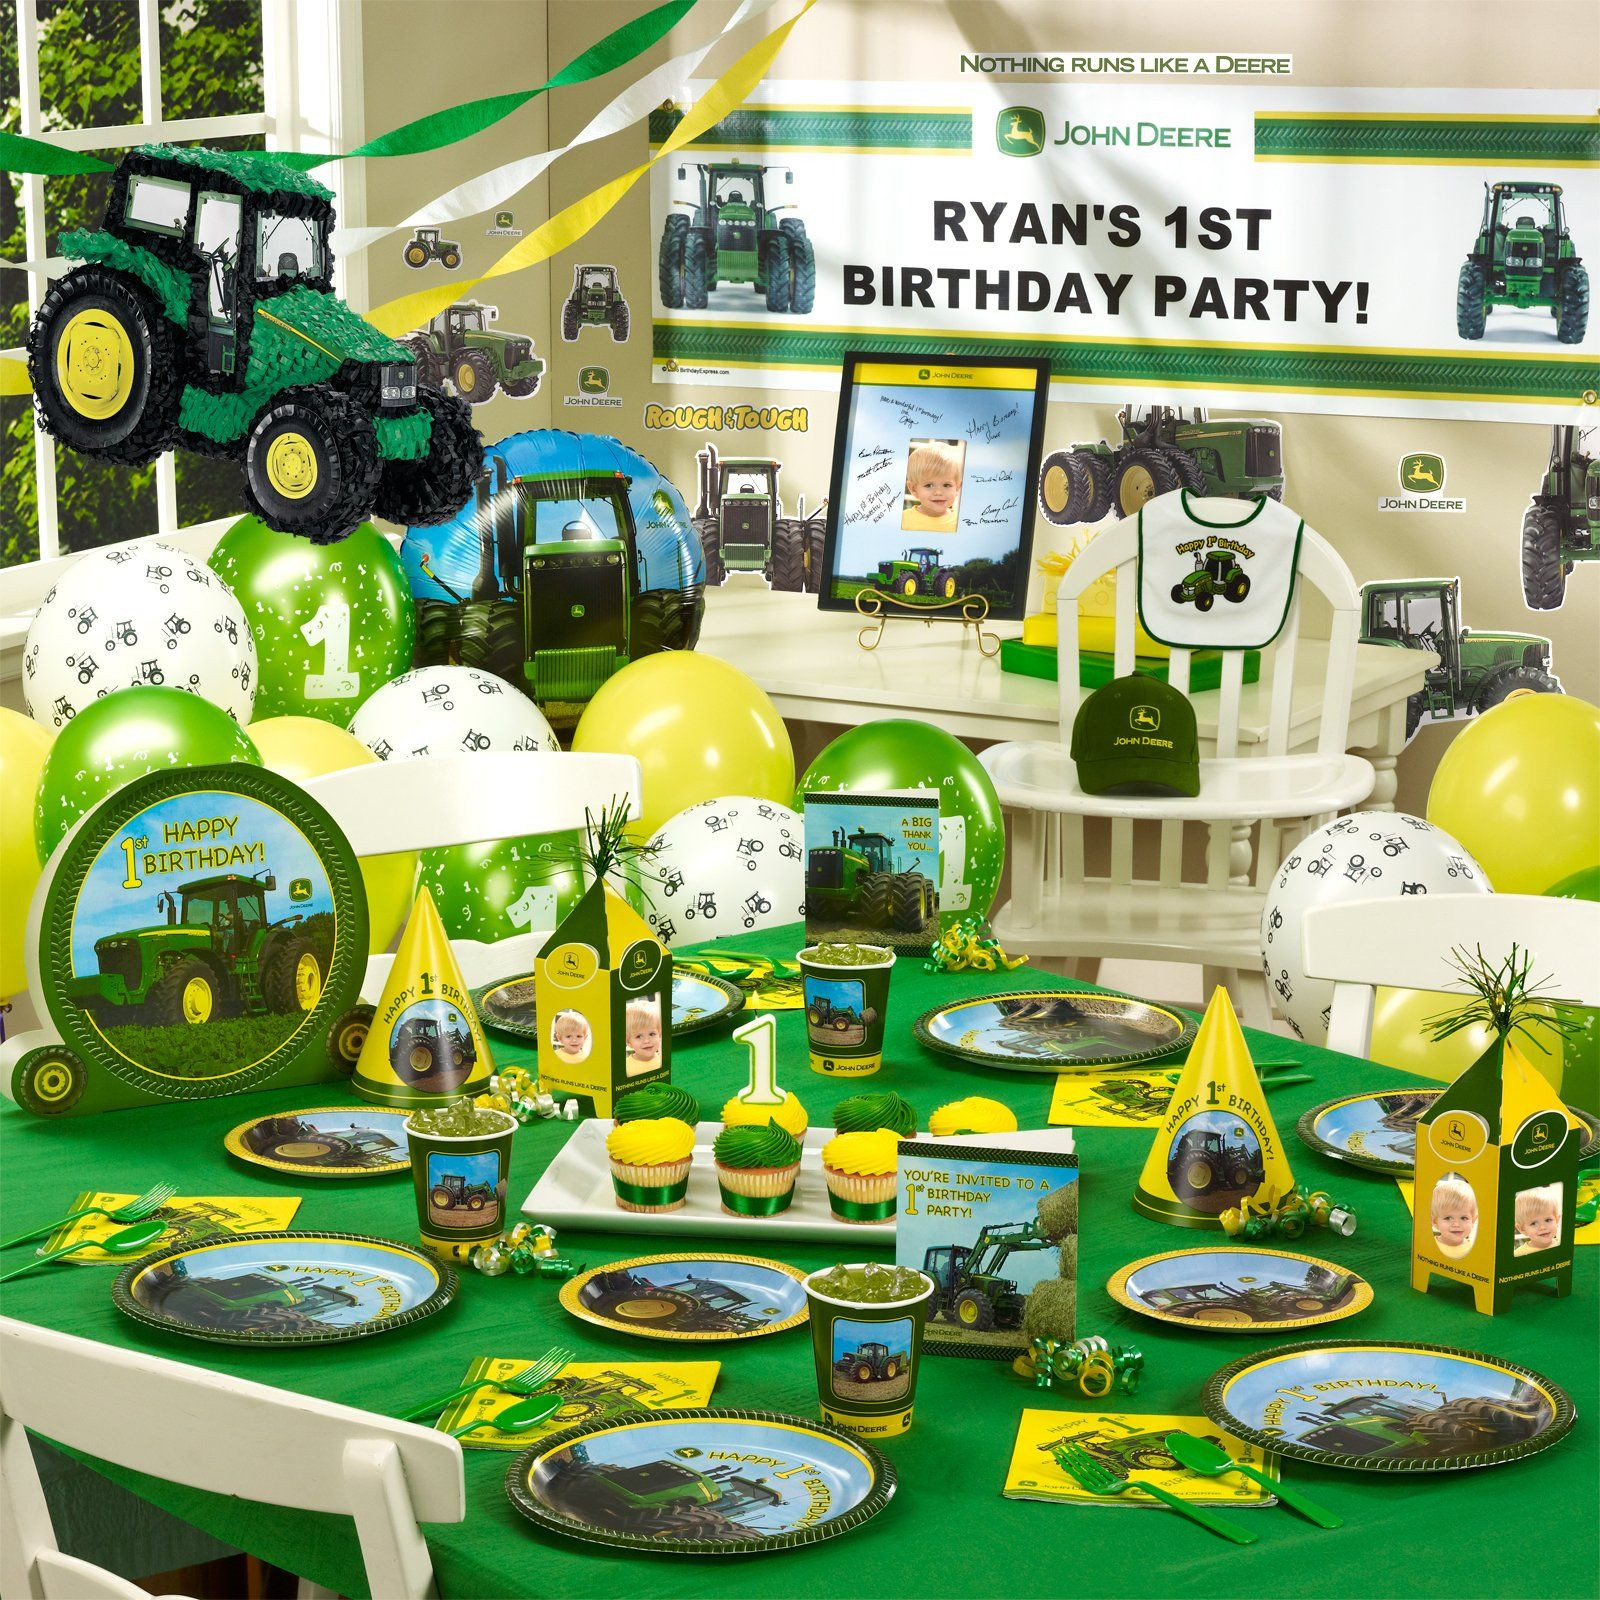 John Deere Birthday Party Supplies
 Pin on Party Ideas